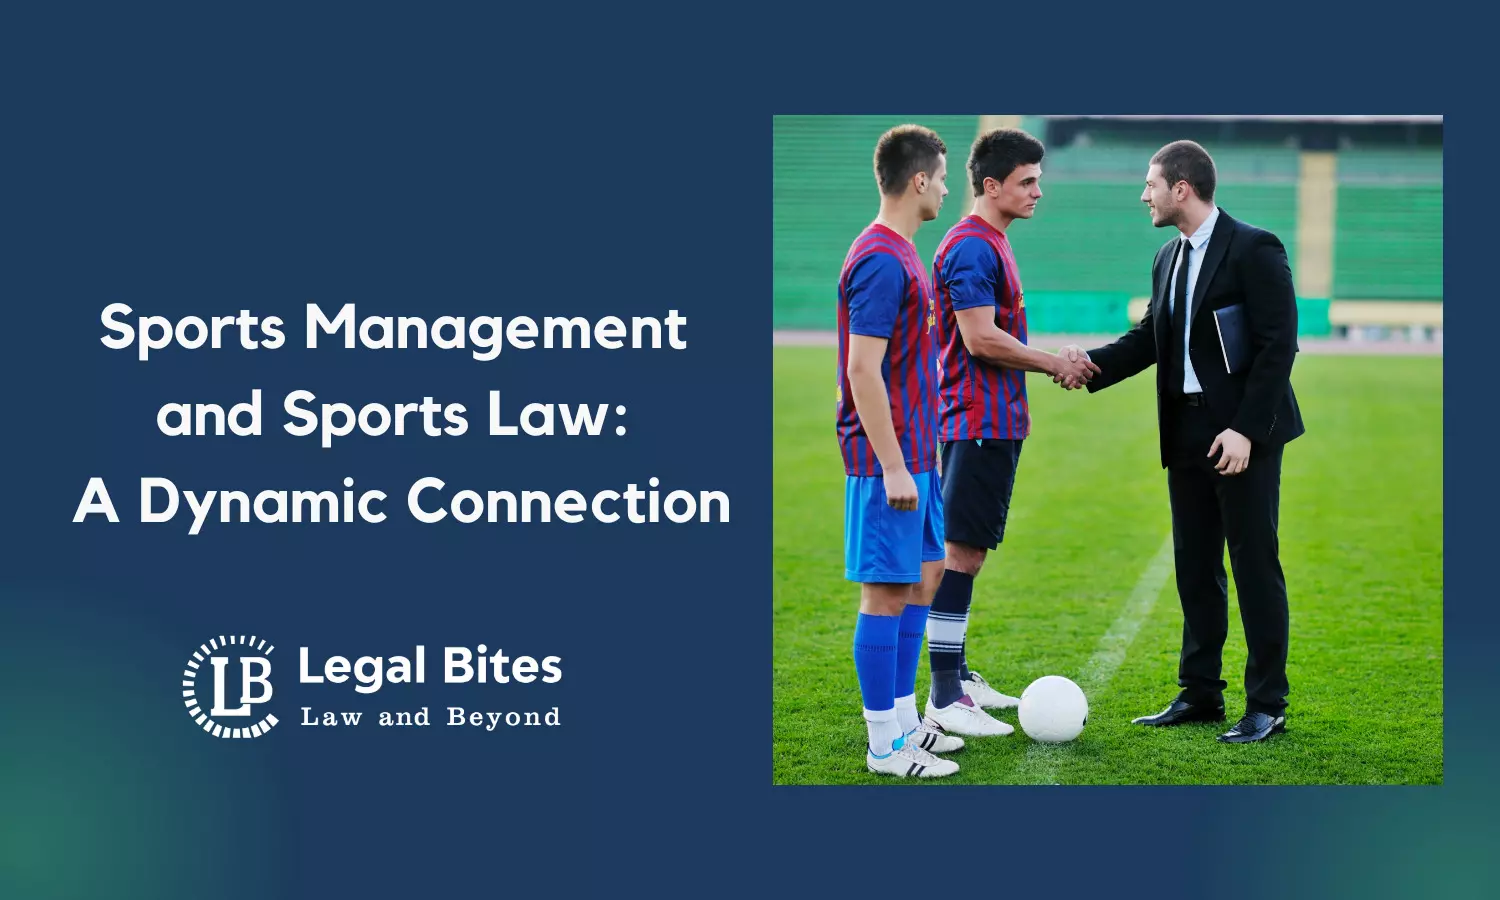 Sports Management and Sports Law: A Dynamic Connection